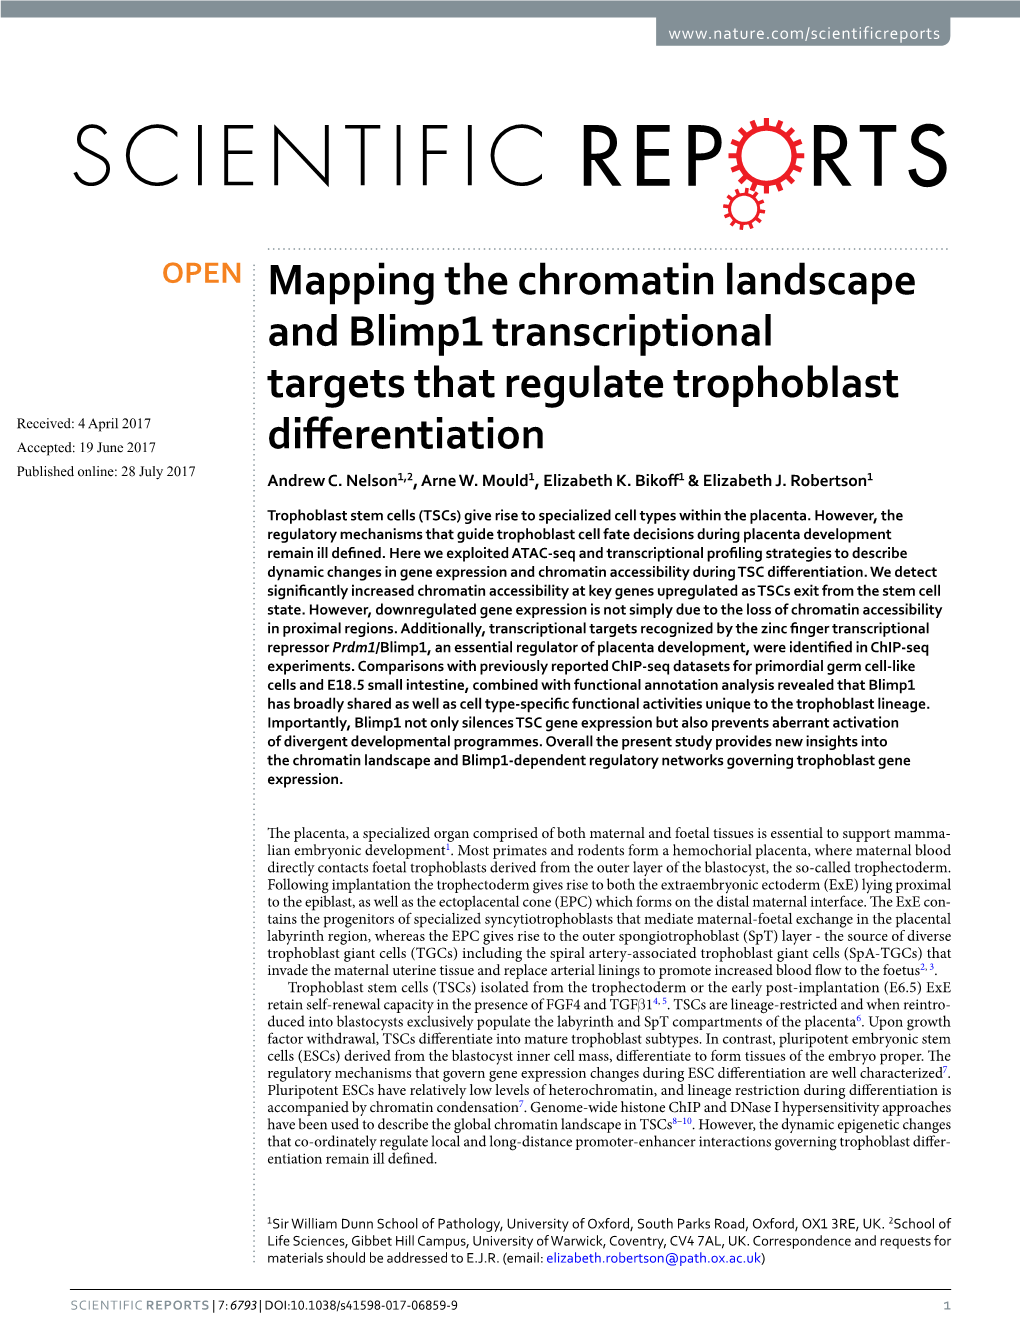 Mapping the Chromatin Landscape and Blimp1 Transcriptional Targets That